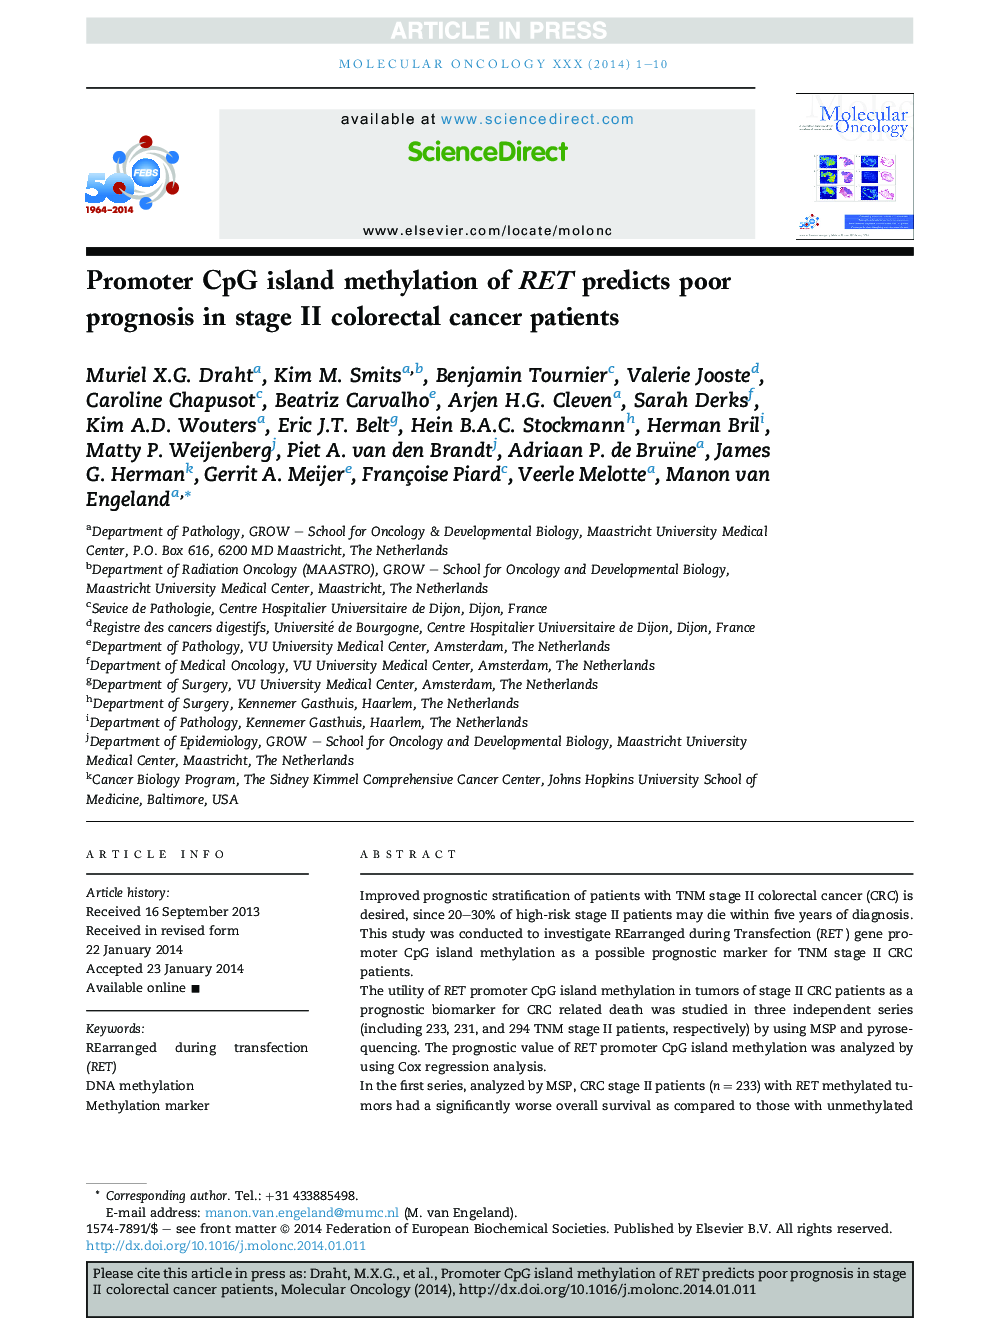 Promoter CpG island methylation of RET predicts poor prognosis in stage II colorectal cancer patients